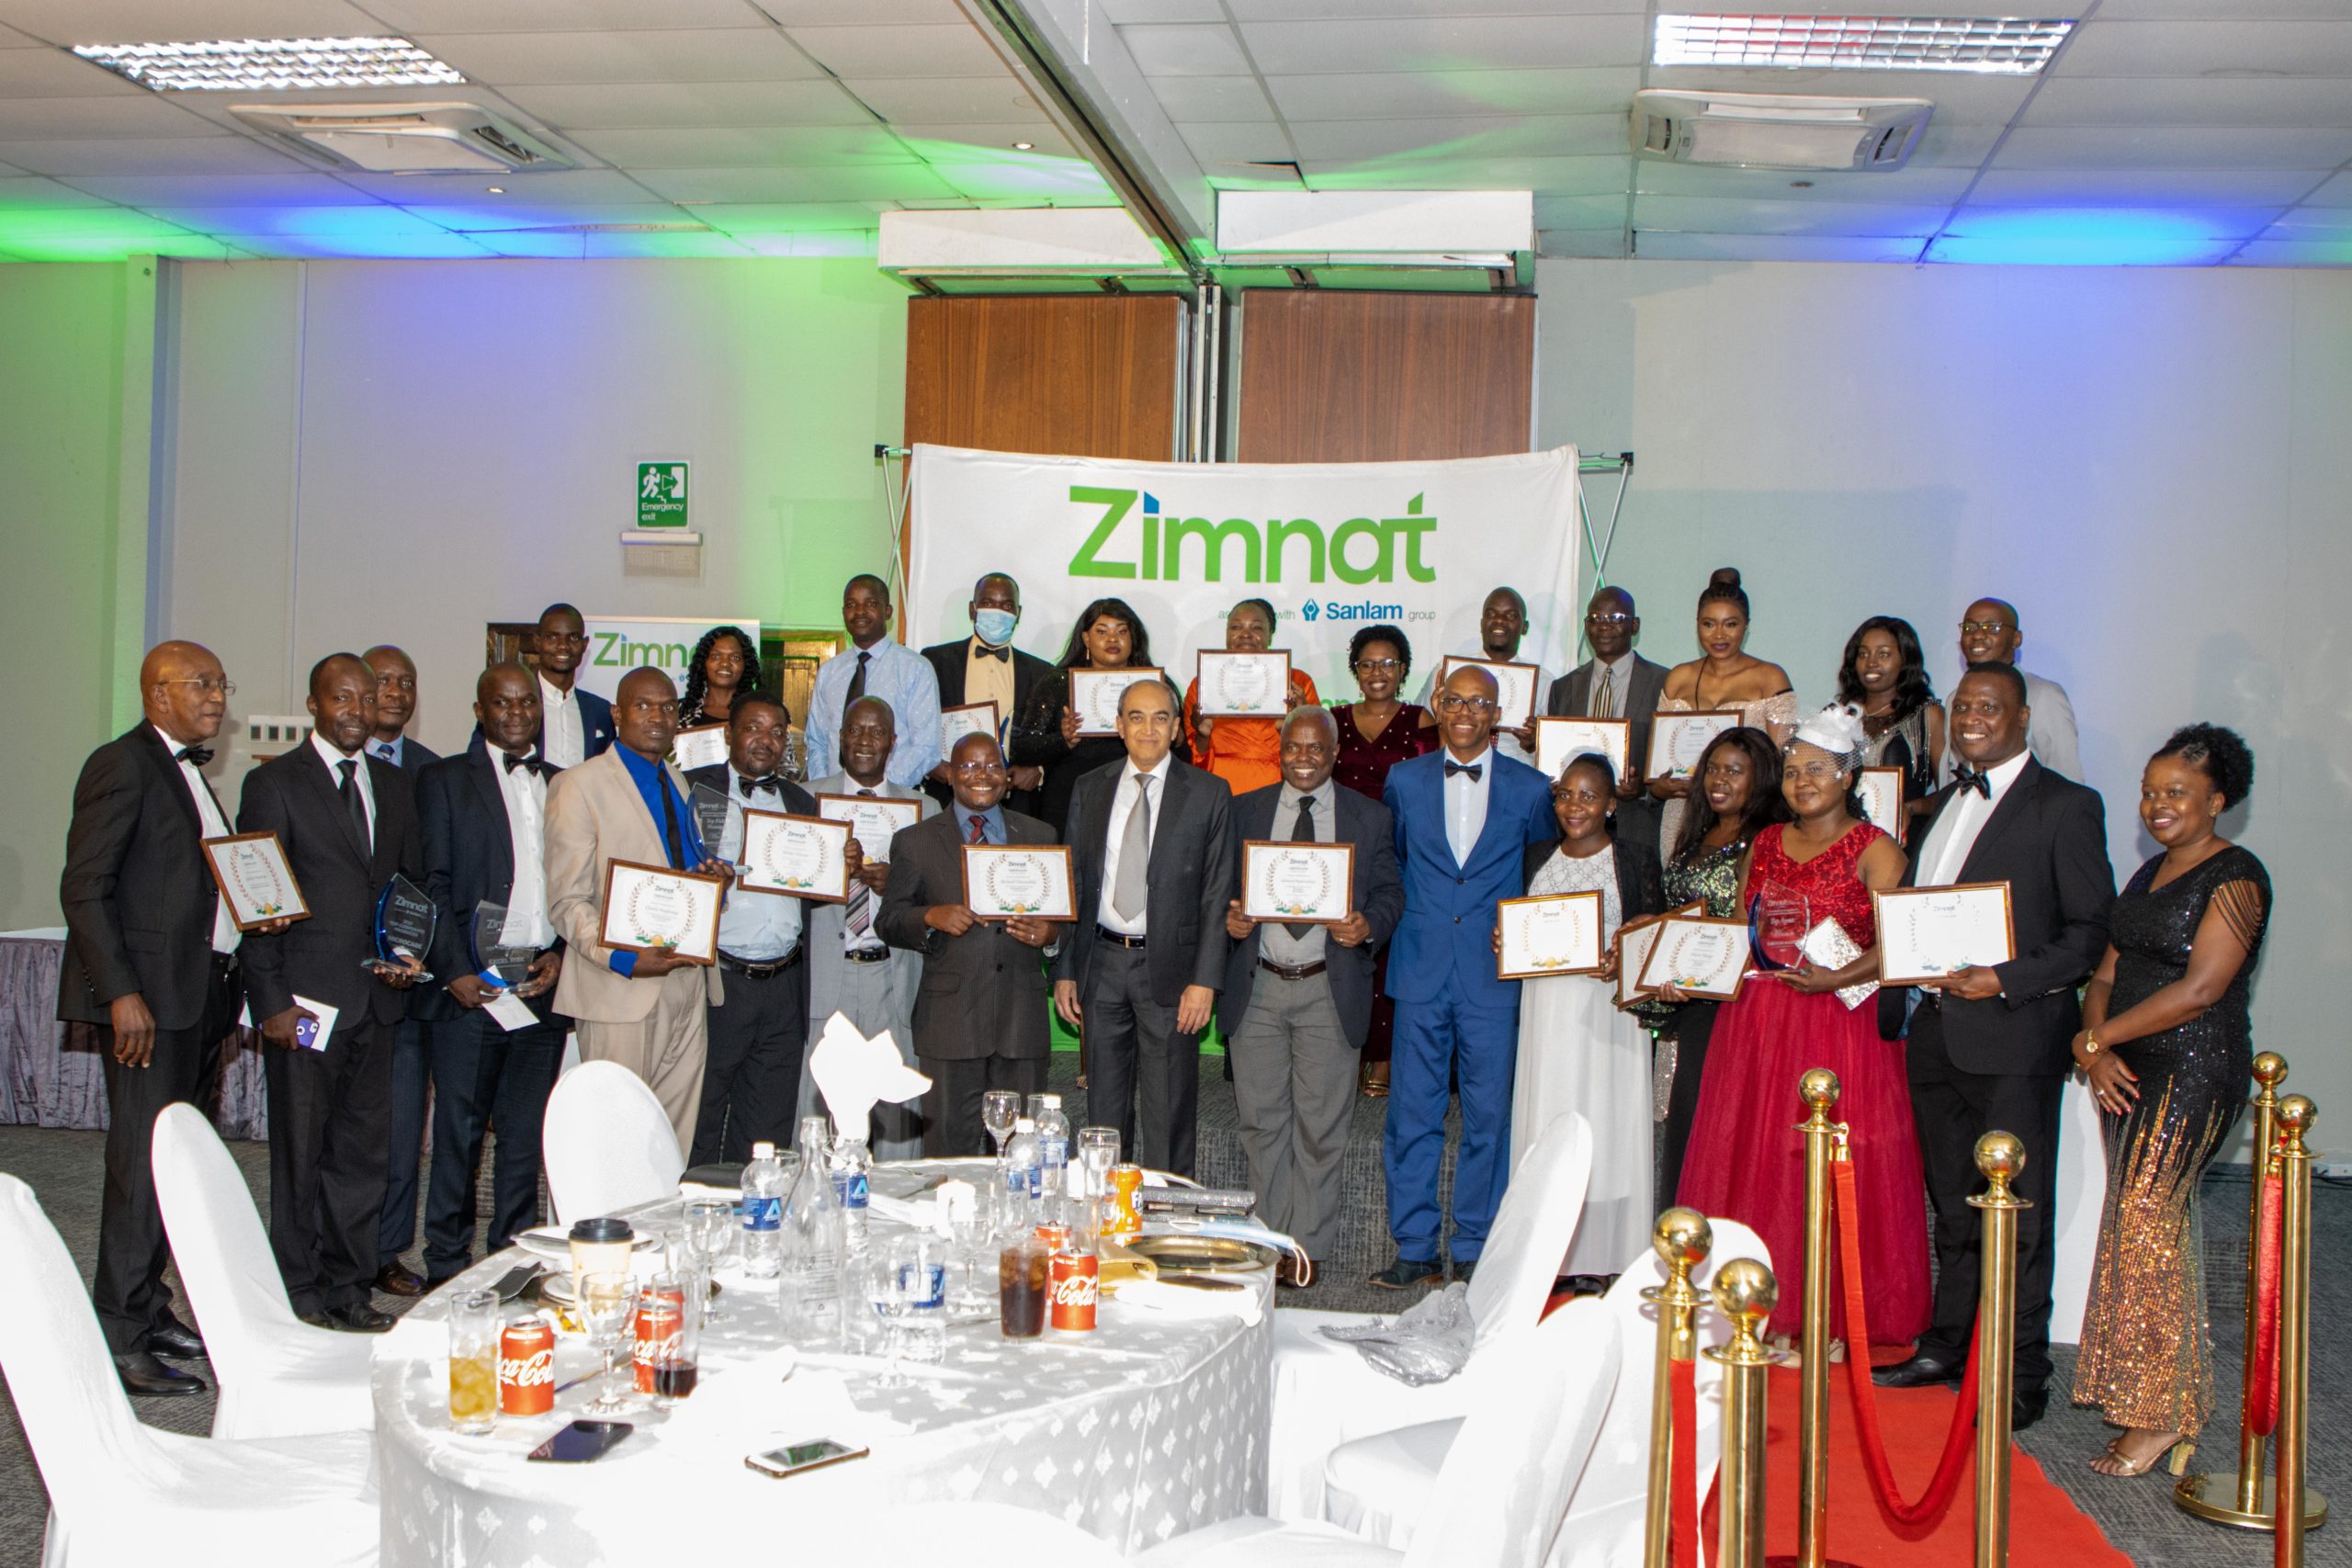 Zimnat honours its sales force in ritzy style